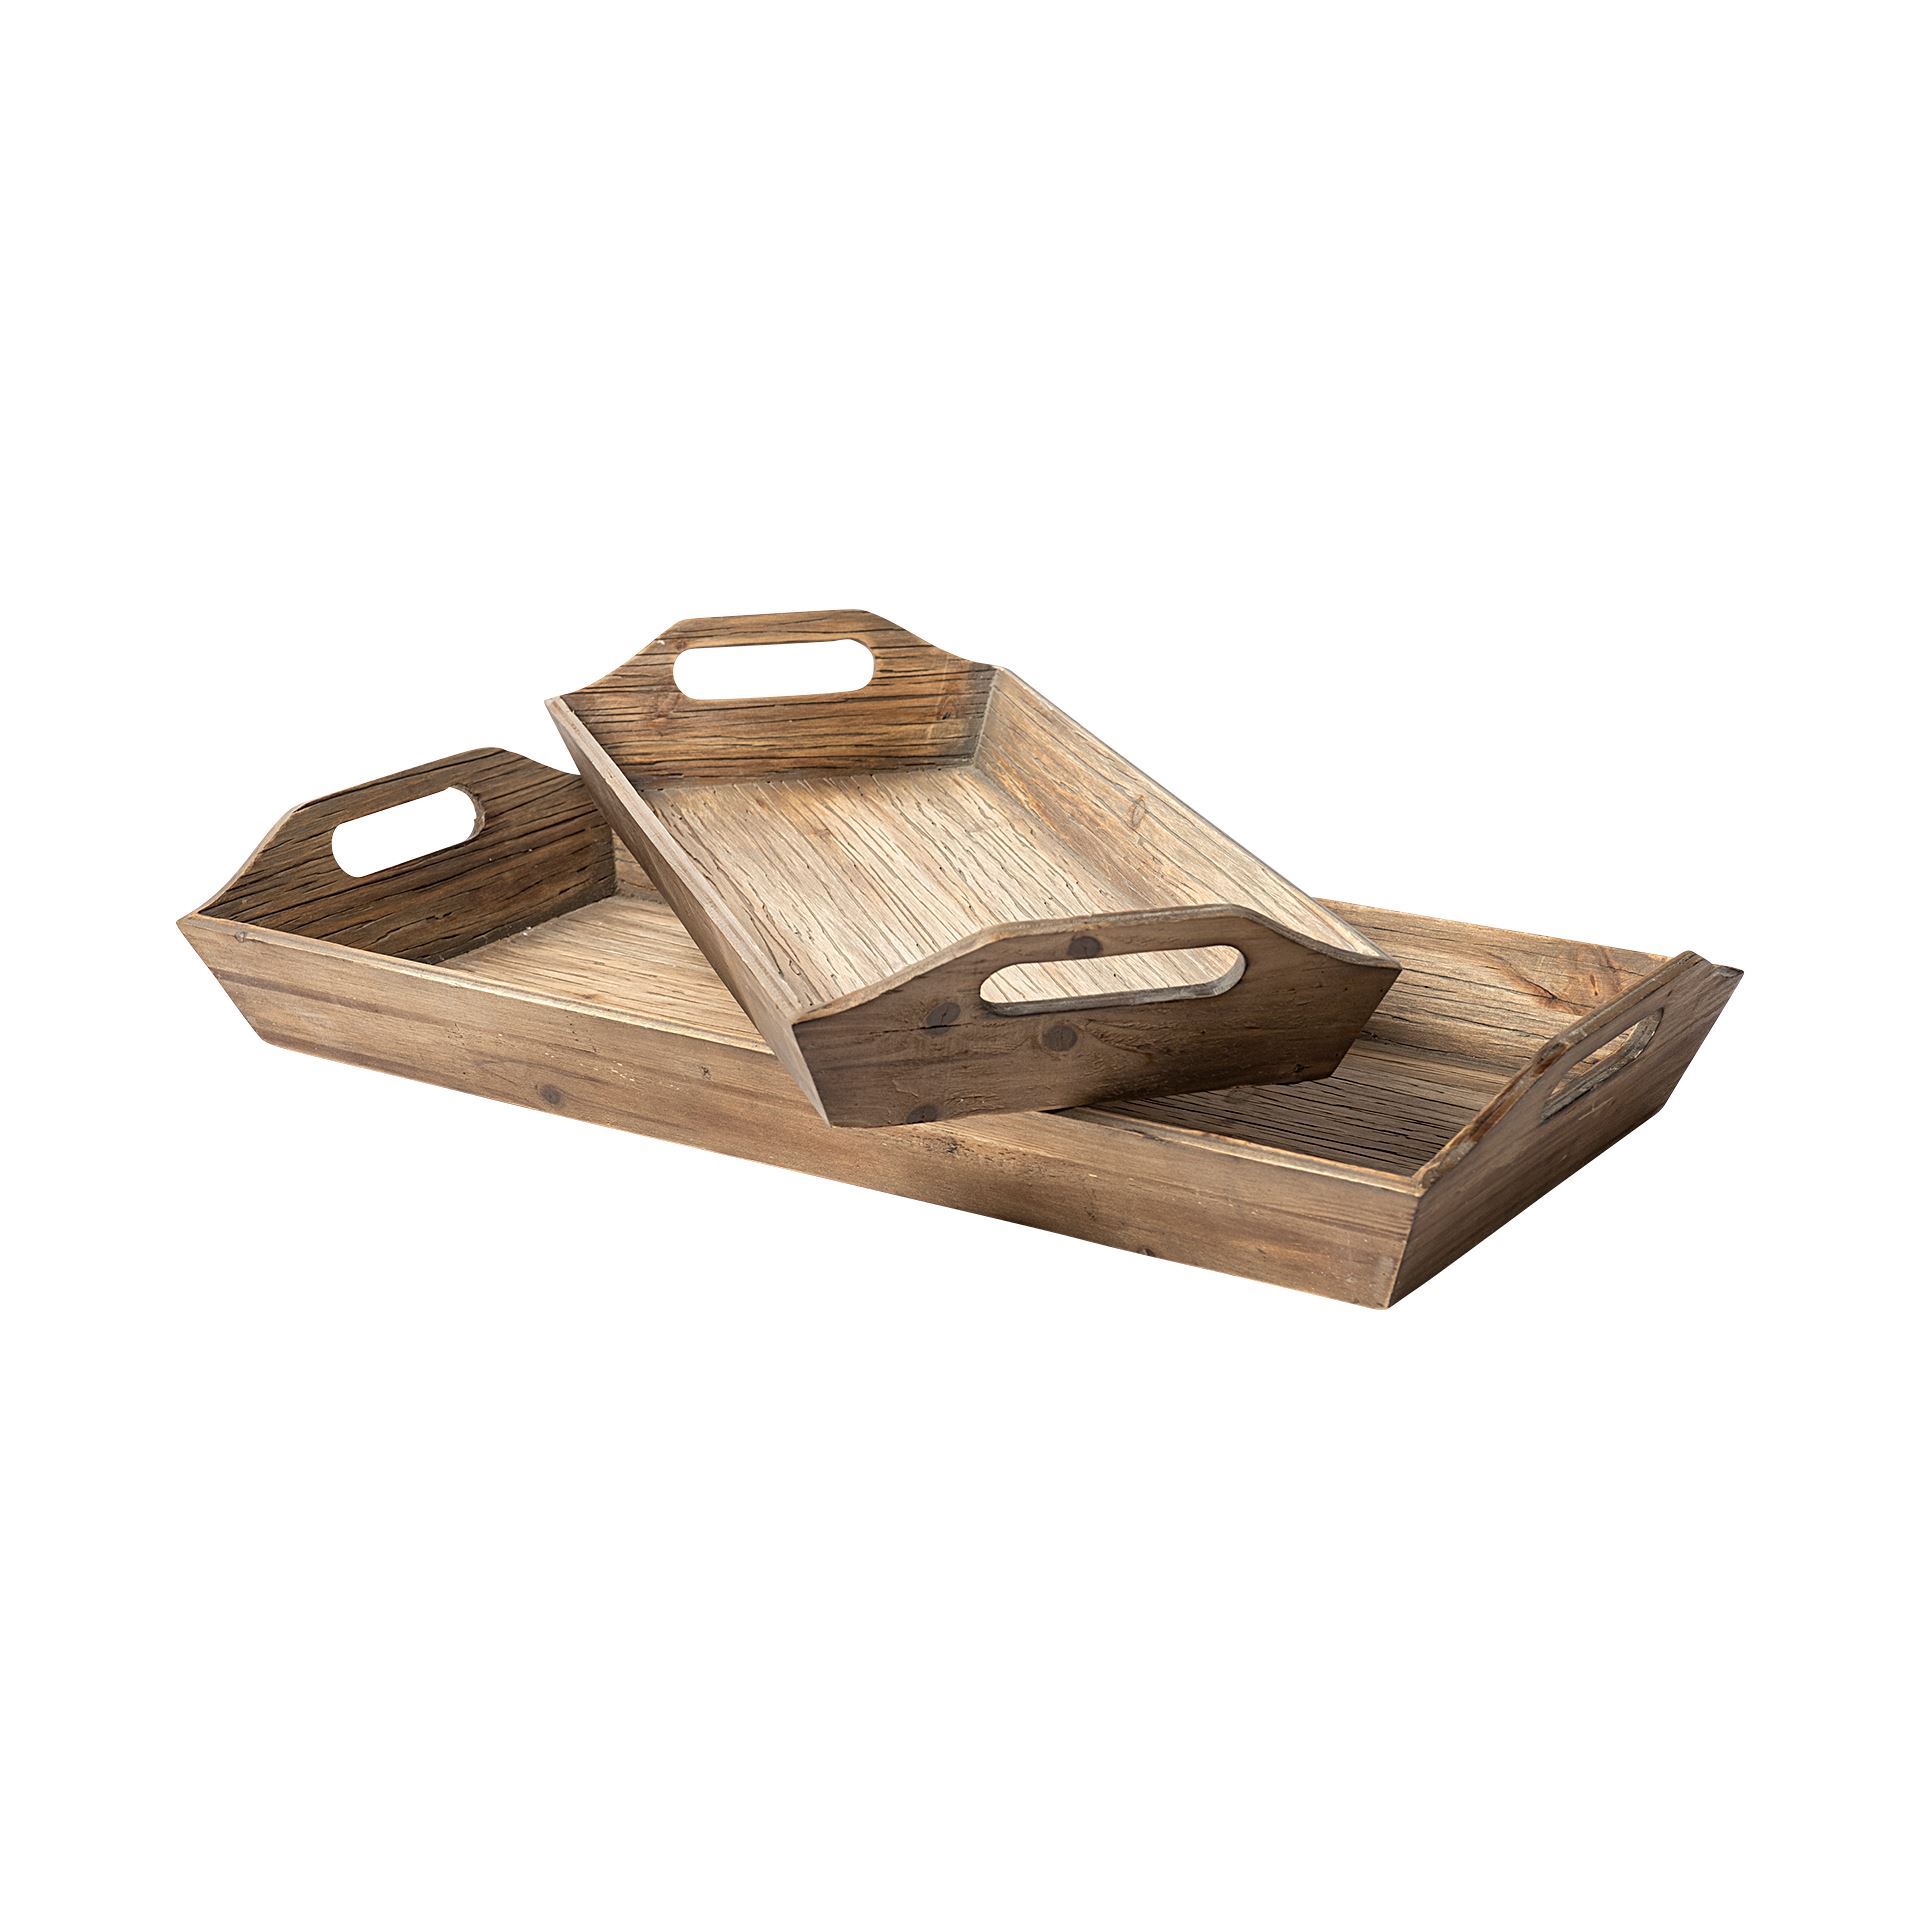 S/2 Natural Brown Wood With Grains And Knots Highlight Trays